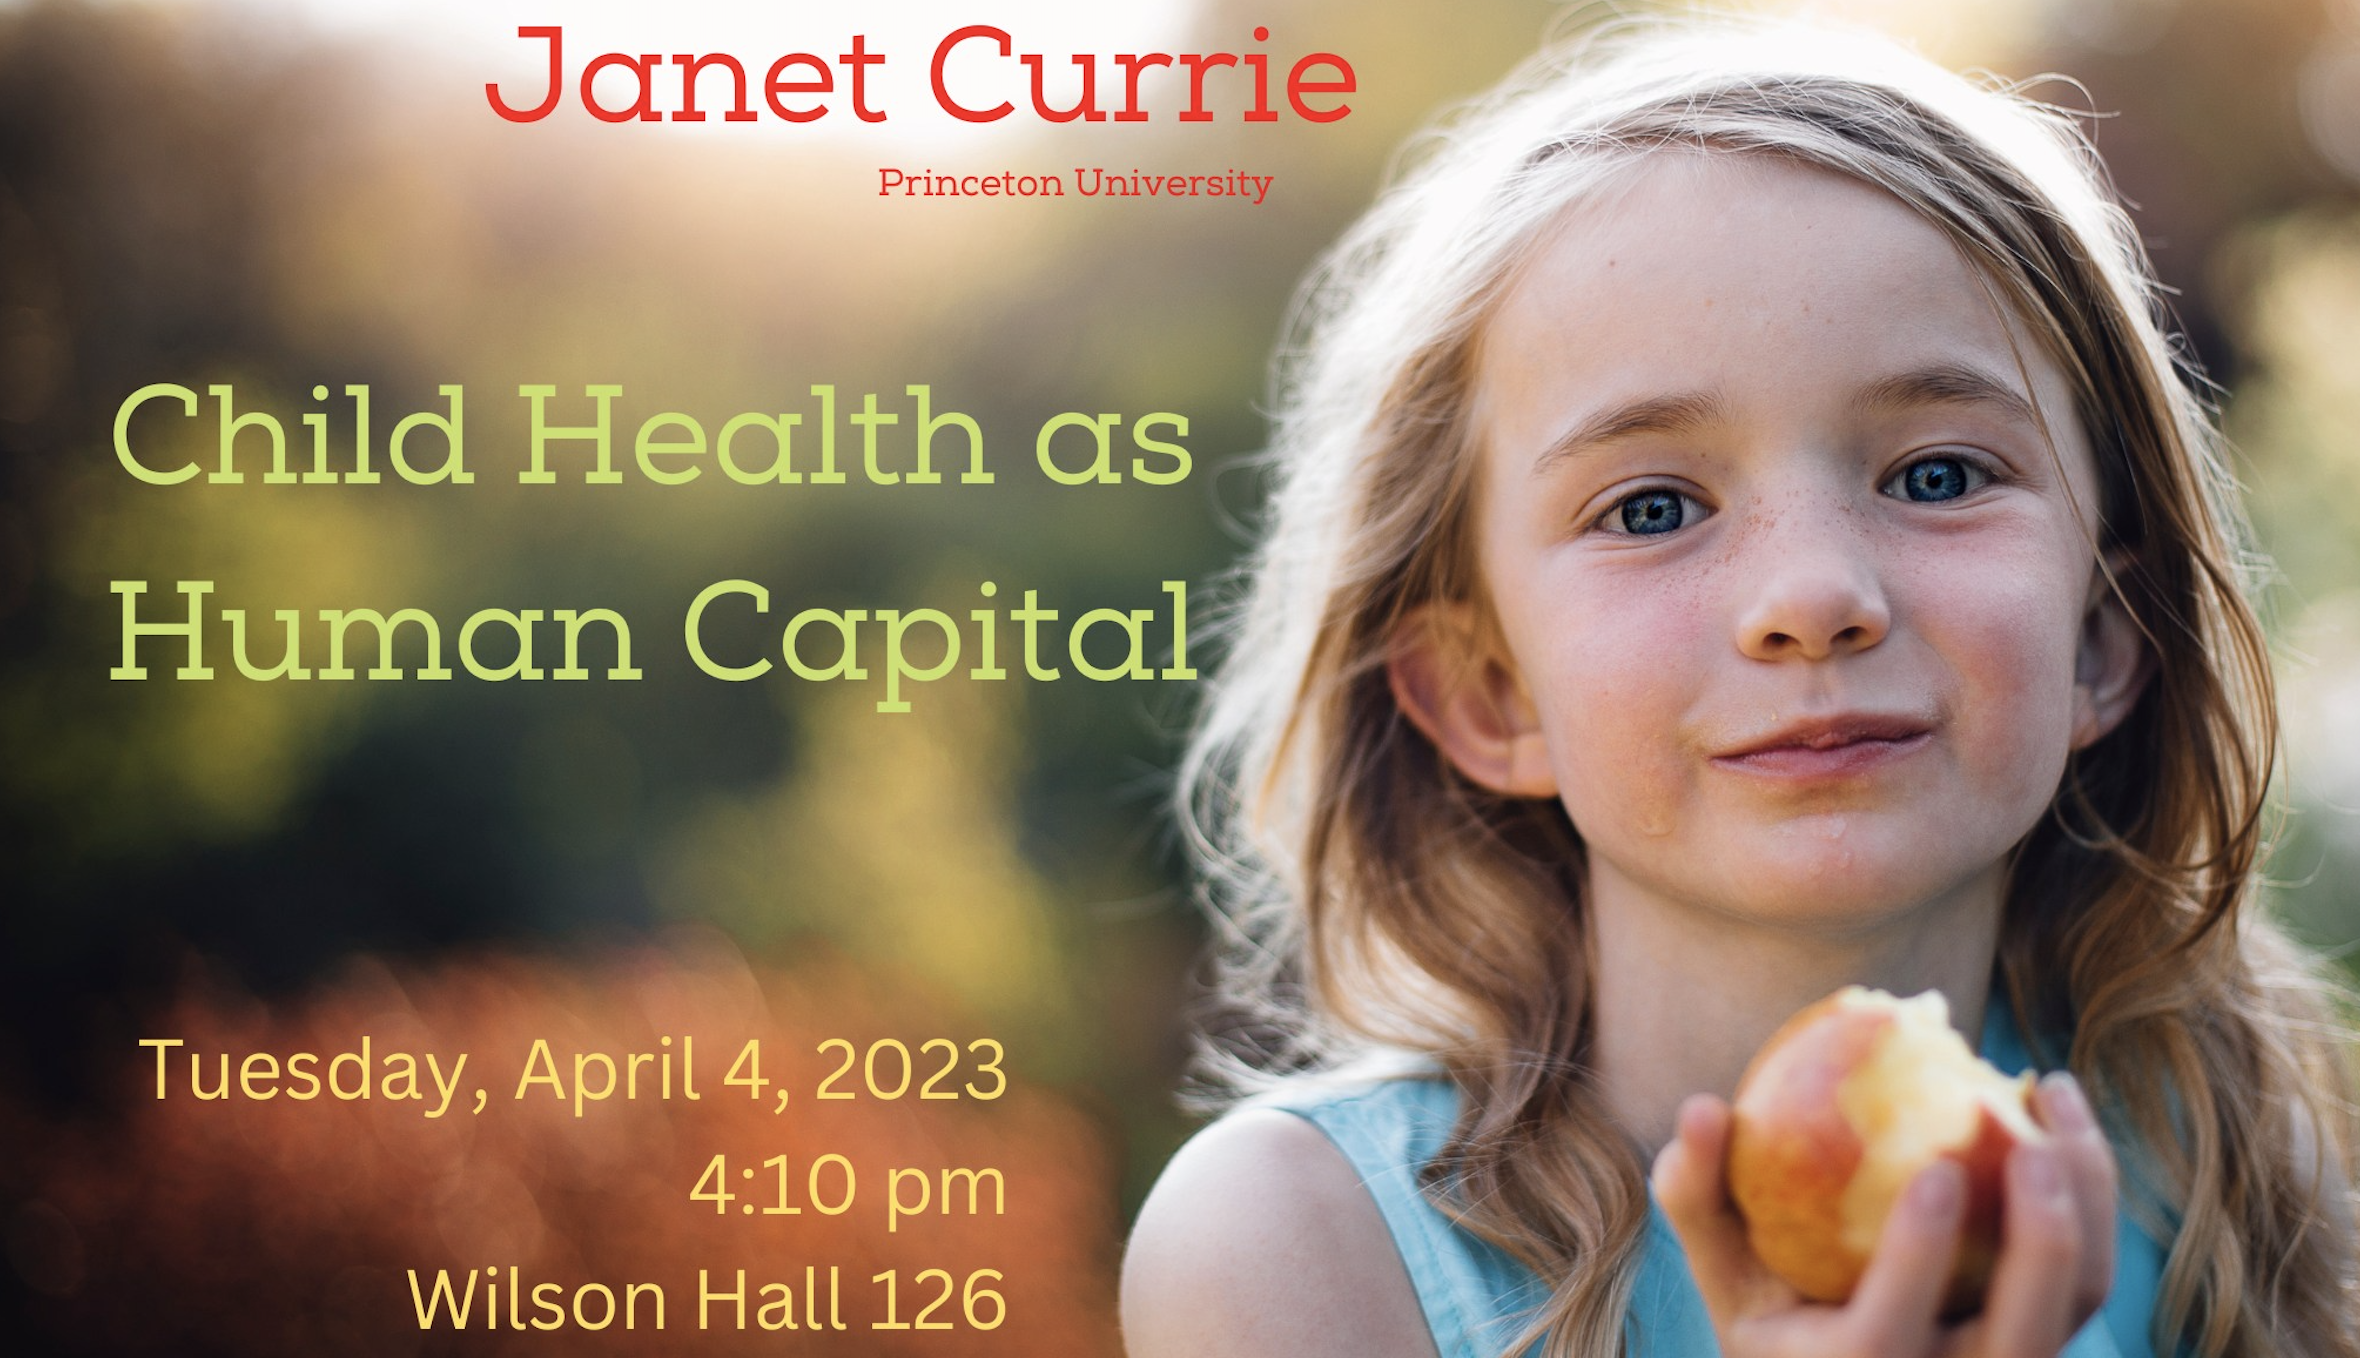 Steine Lecture in Economics to discuss ‘Child Health as Human Capital’ on April 4